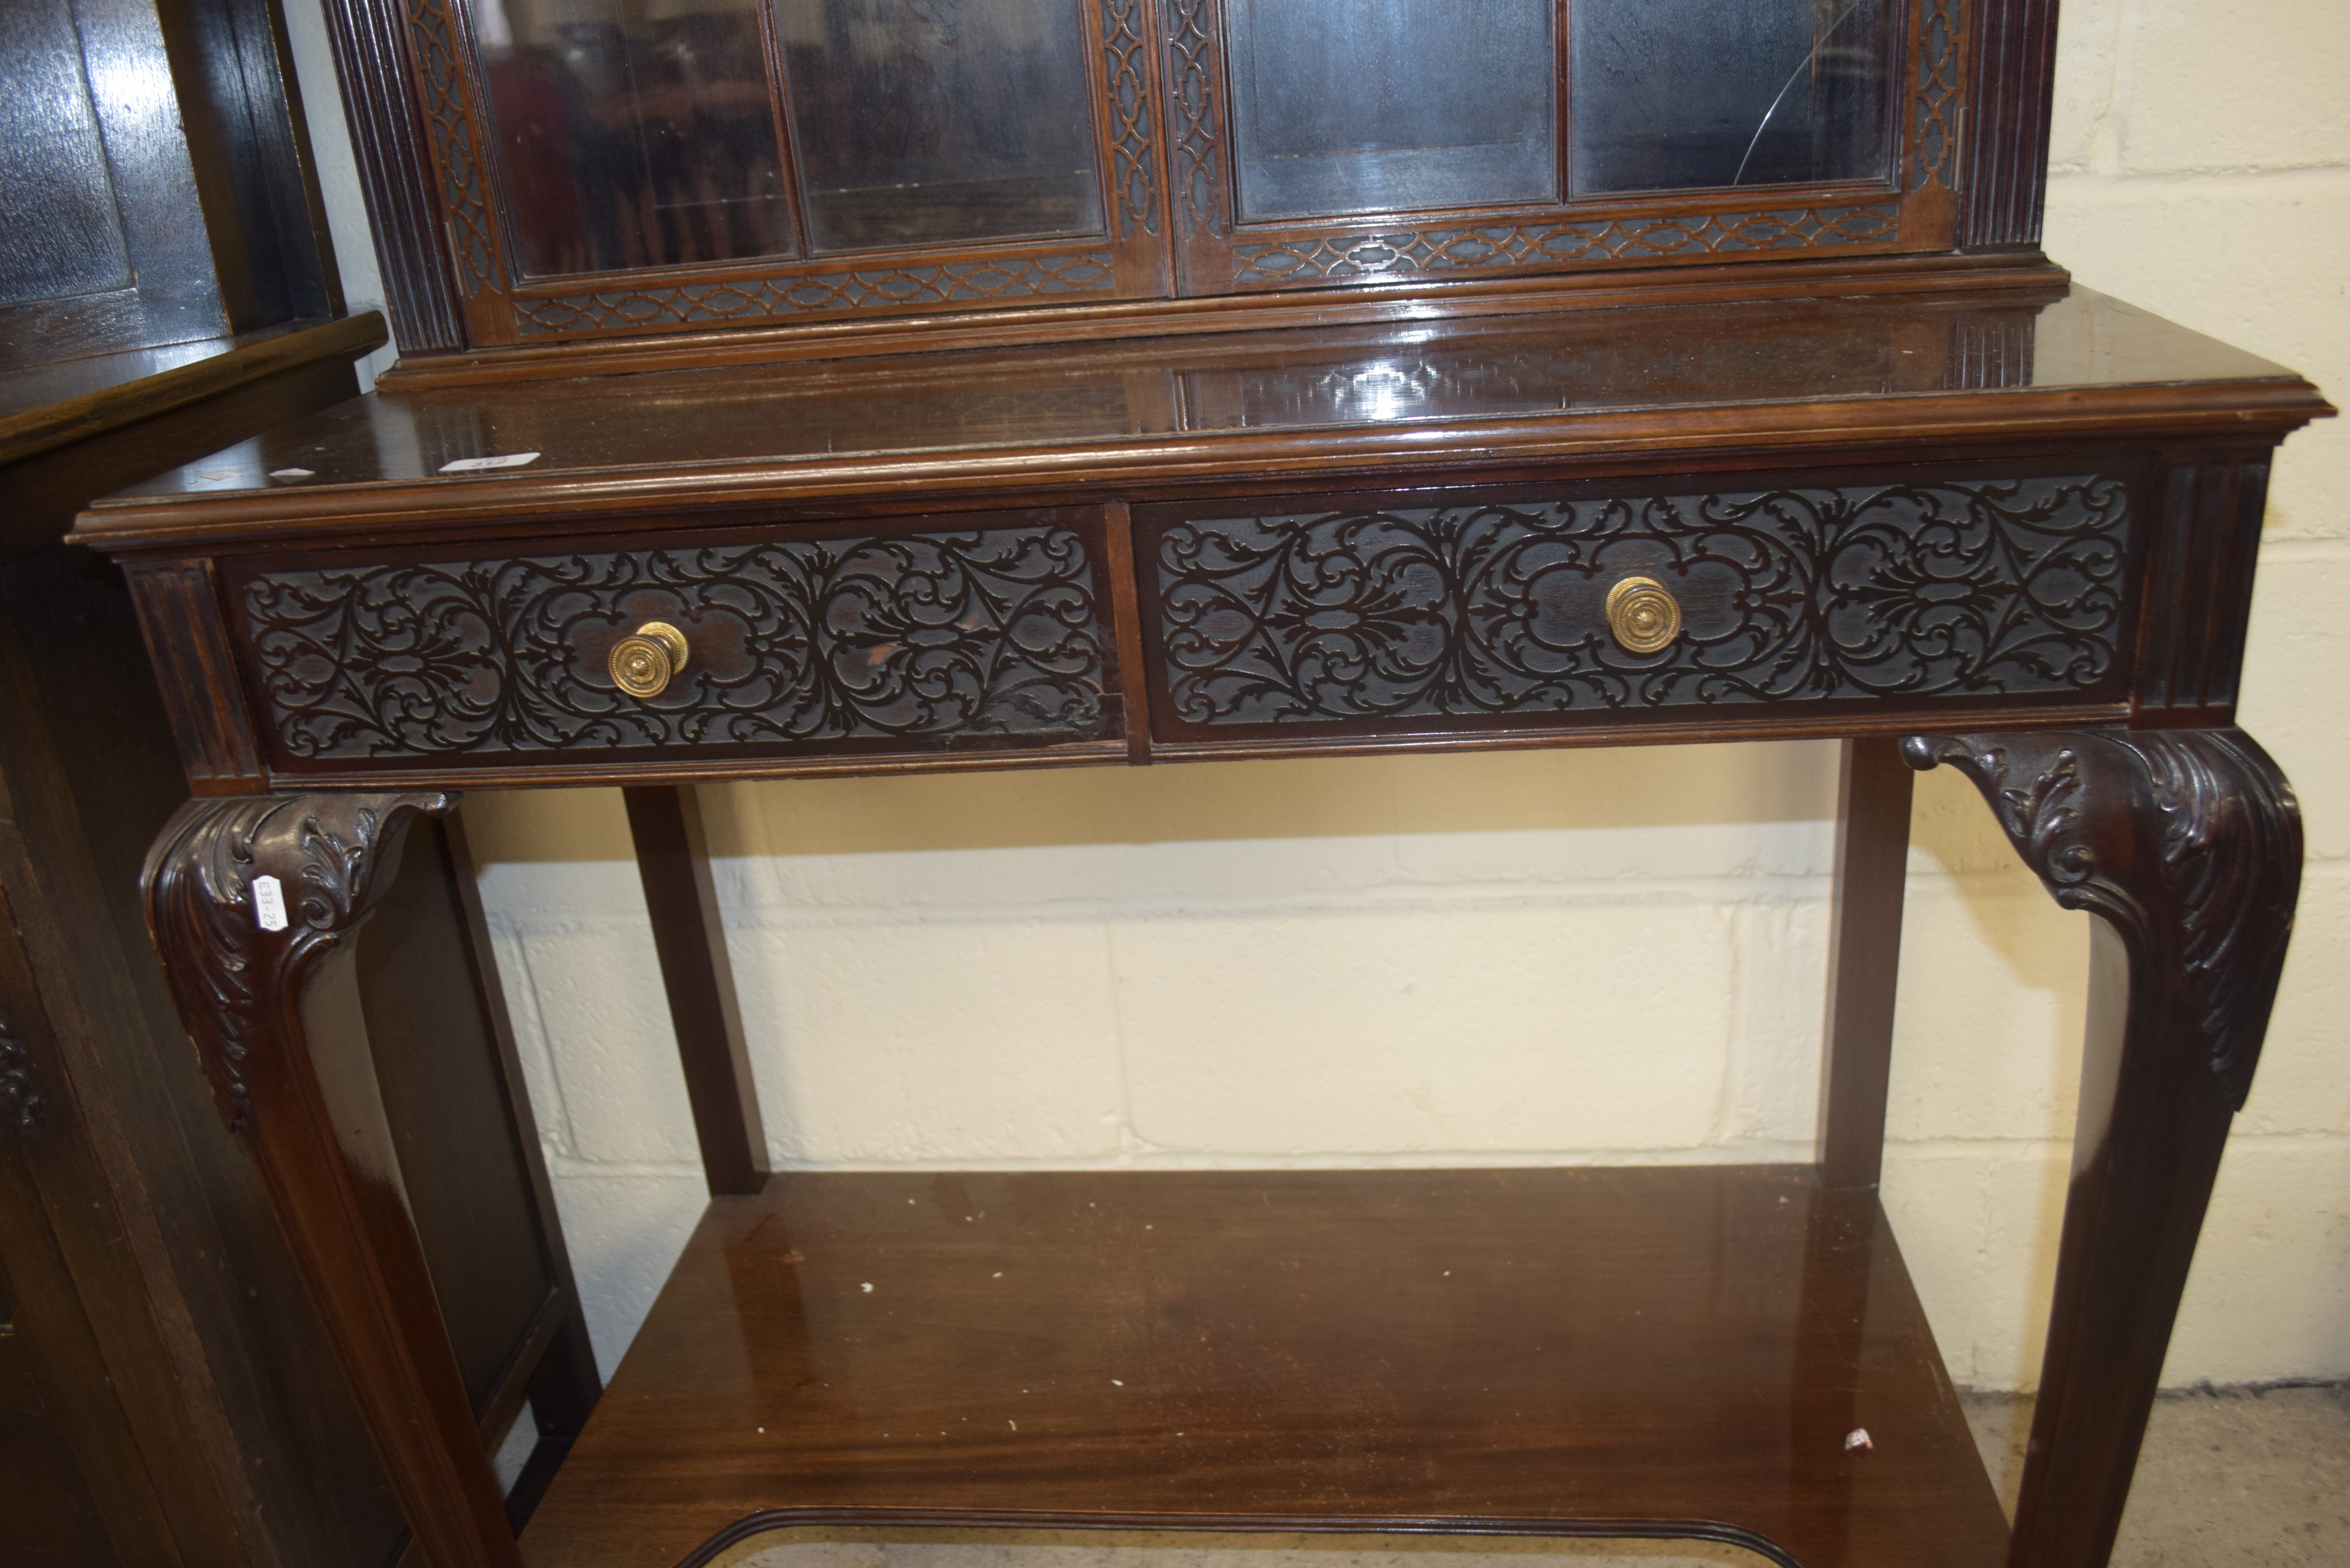 EDWARDIAN MAHOGANY SIDE CABINET WITH GLAZED TOP SECTION OVER A BASE WITH TWO DRAWERS AND A SHELF, - Image 2 of 2